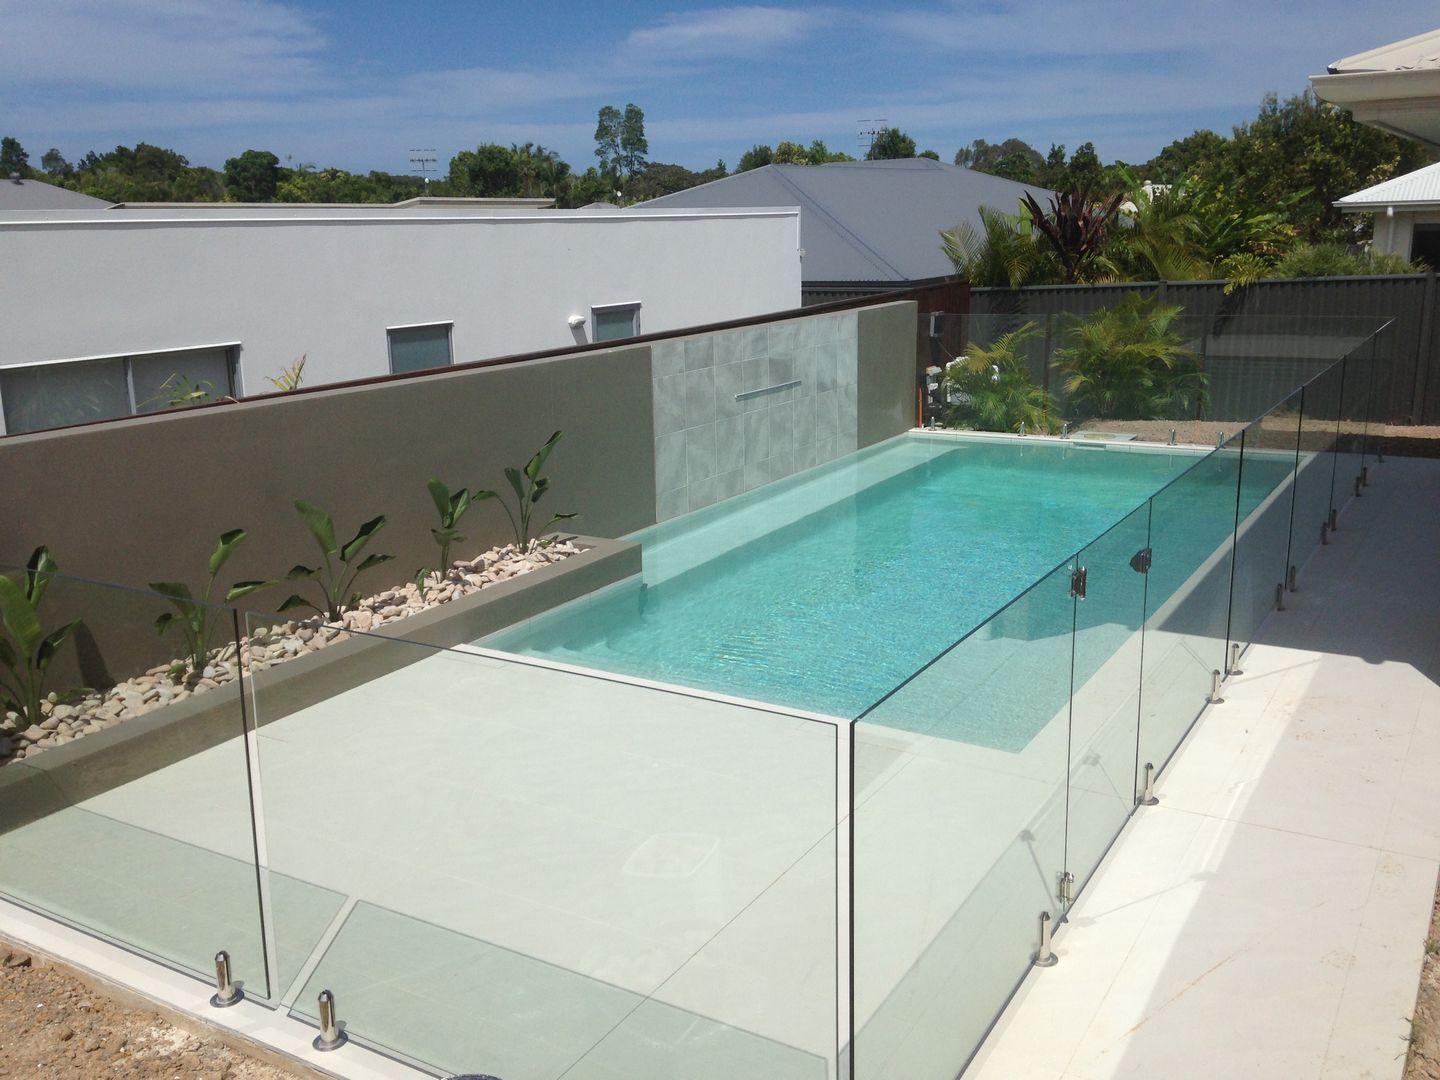 Pool Surrounds with Glass Pool Fencing